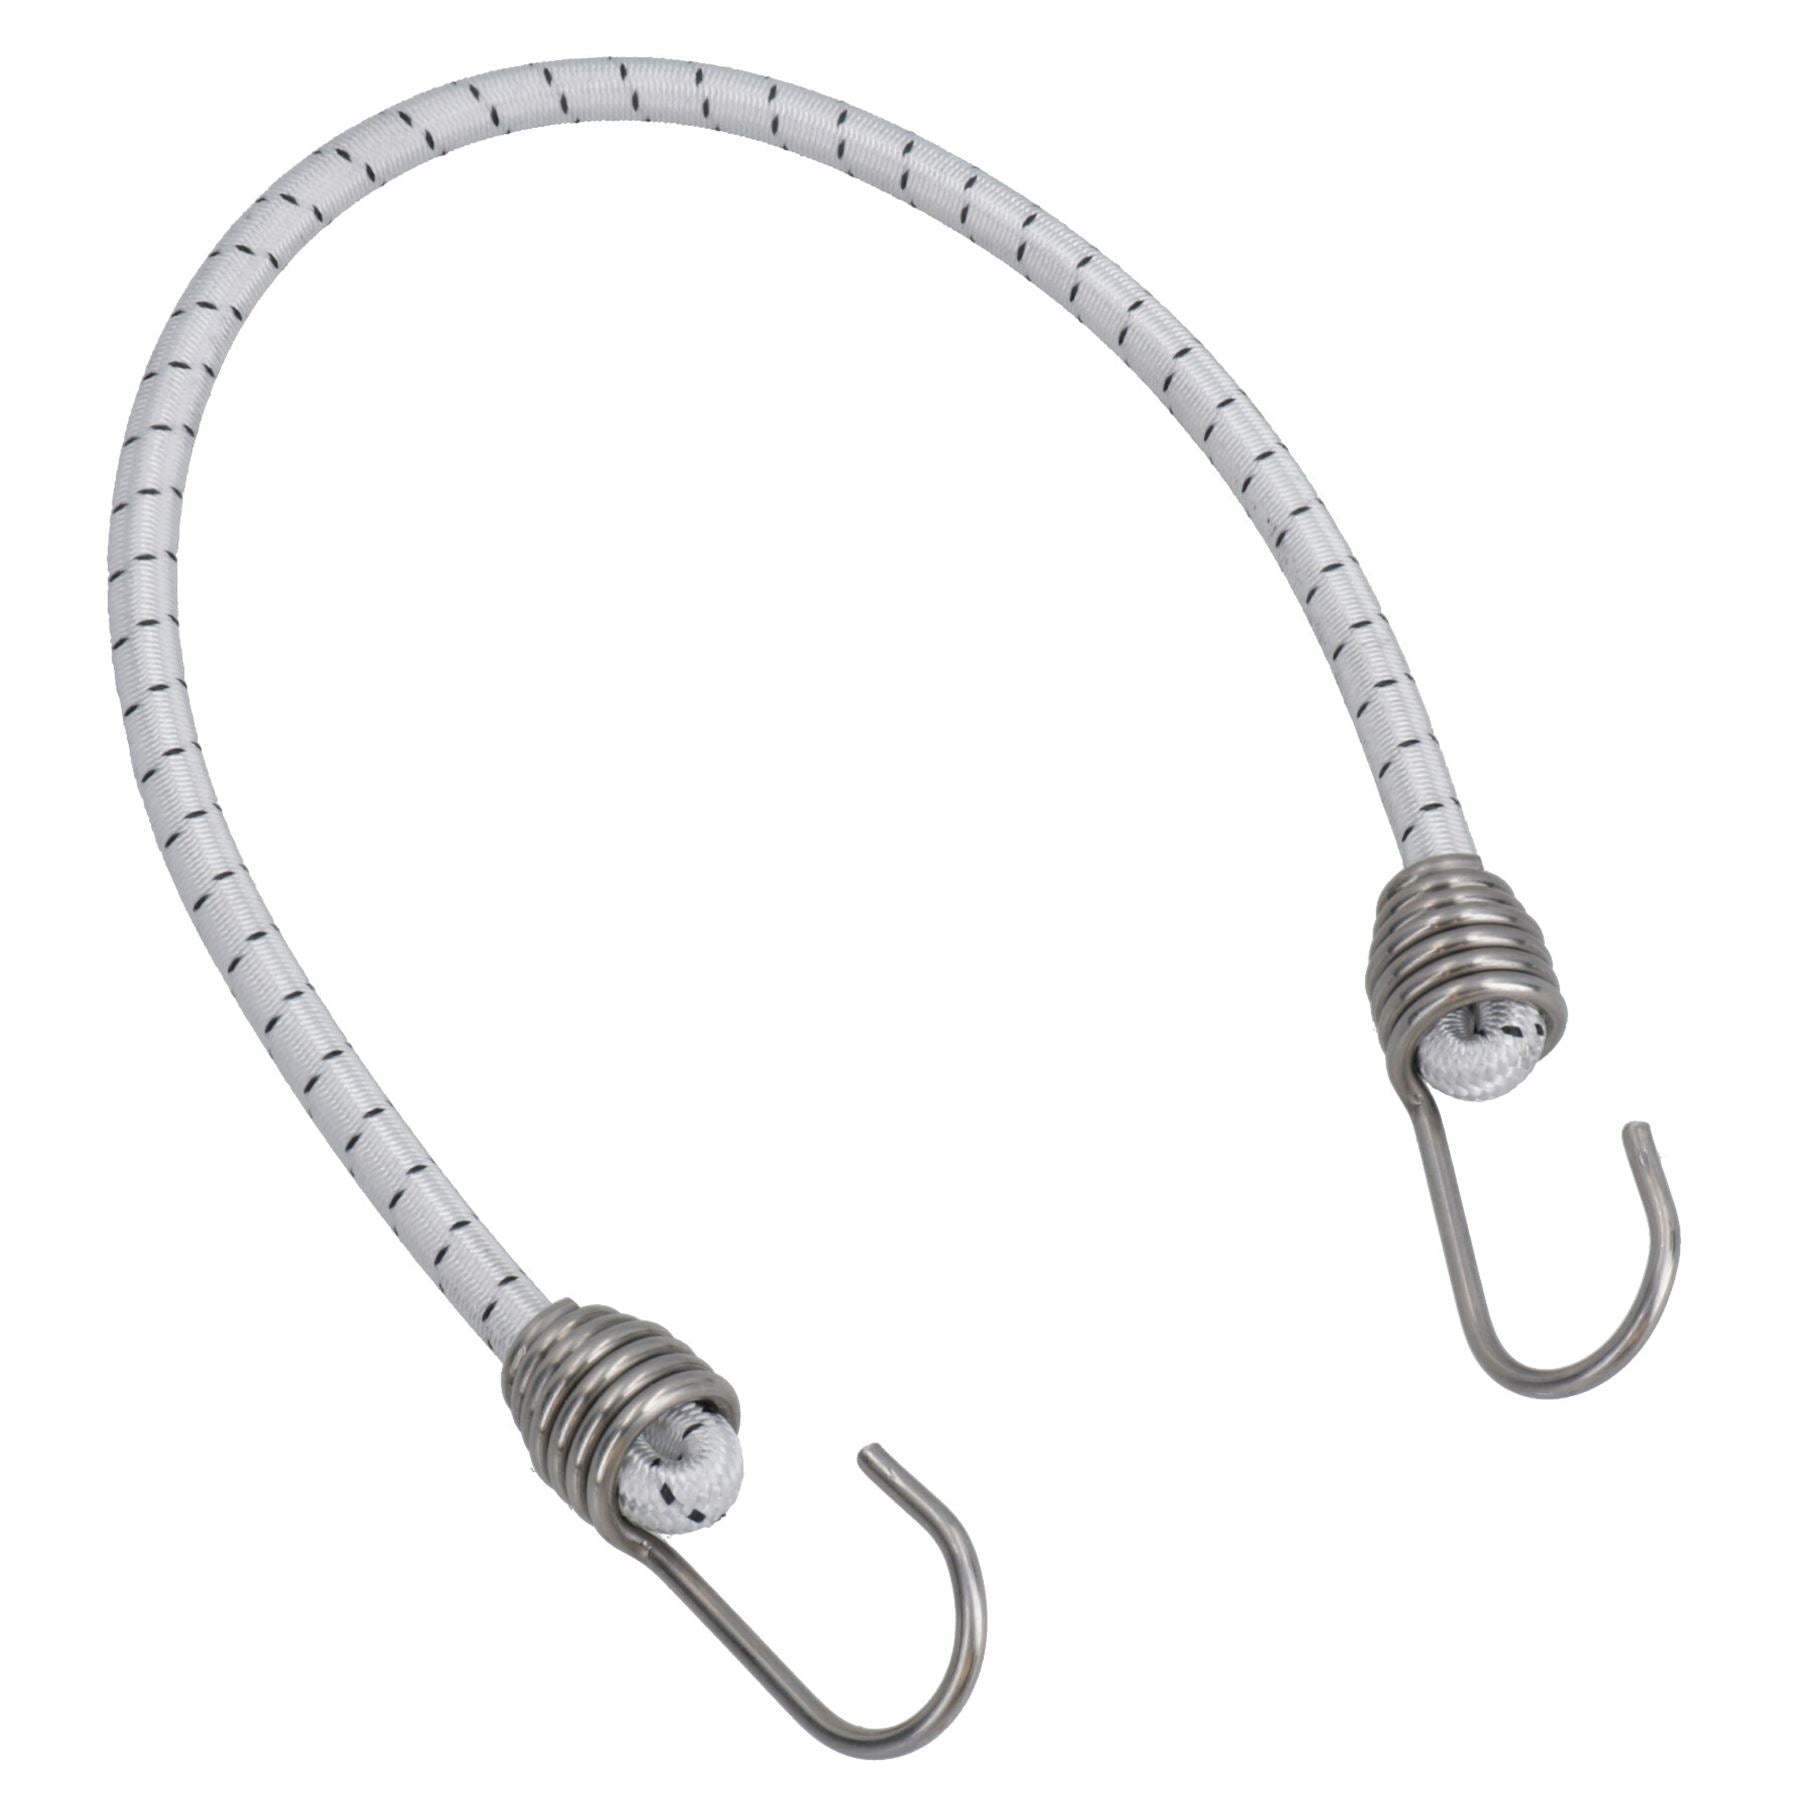 20" Bungee Rope With Stainless Steel Hooks Cords Shock Elastic Marine Boat